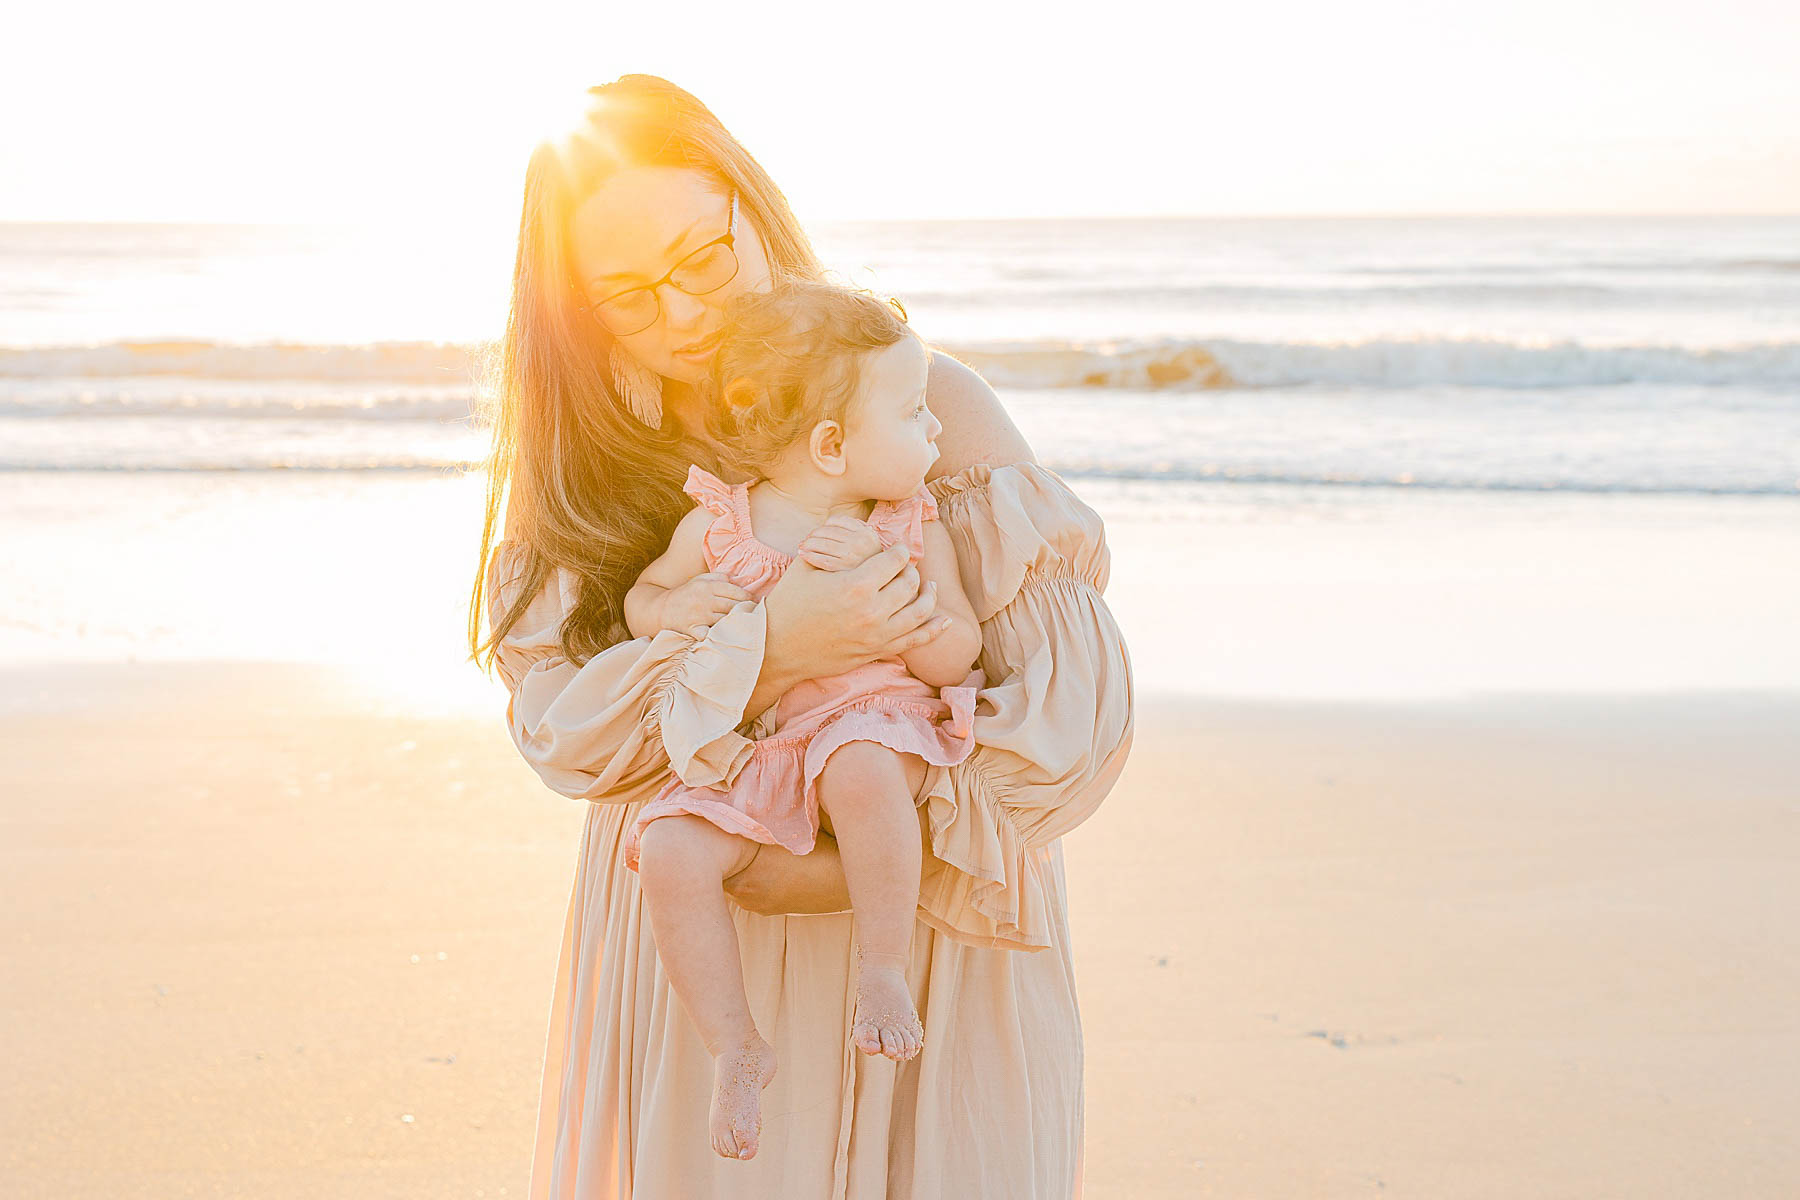 woman wearing sun hat holding baby girl on the beach at sunrise